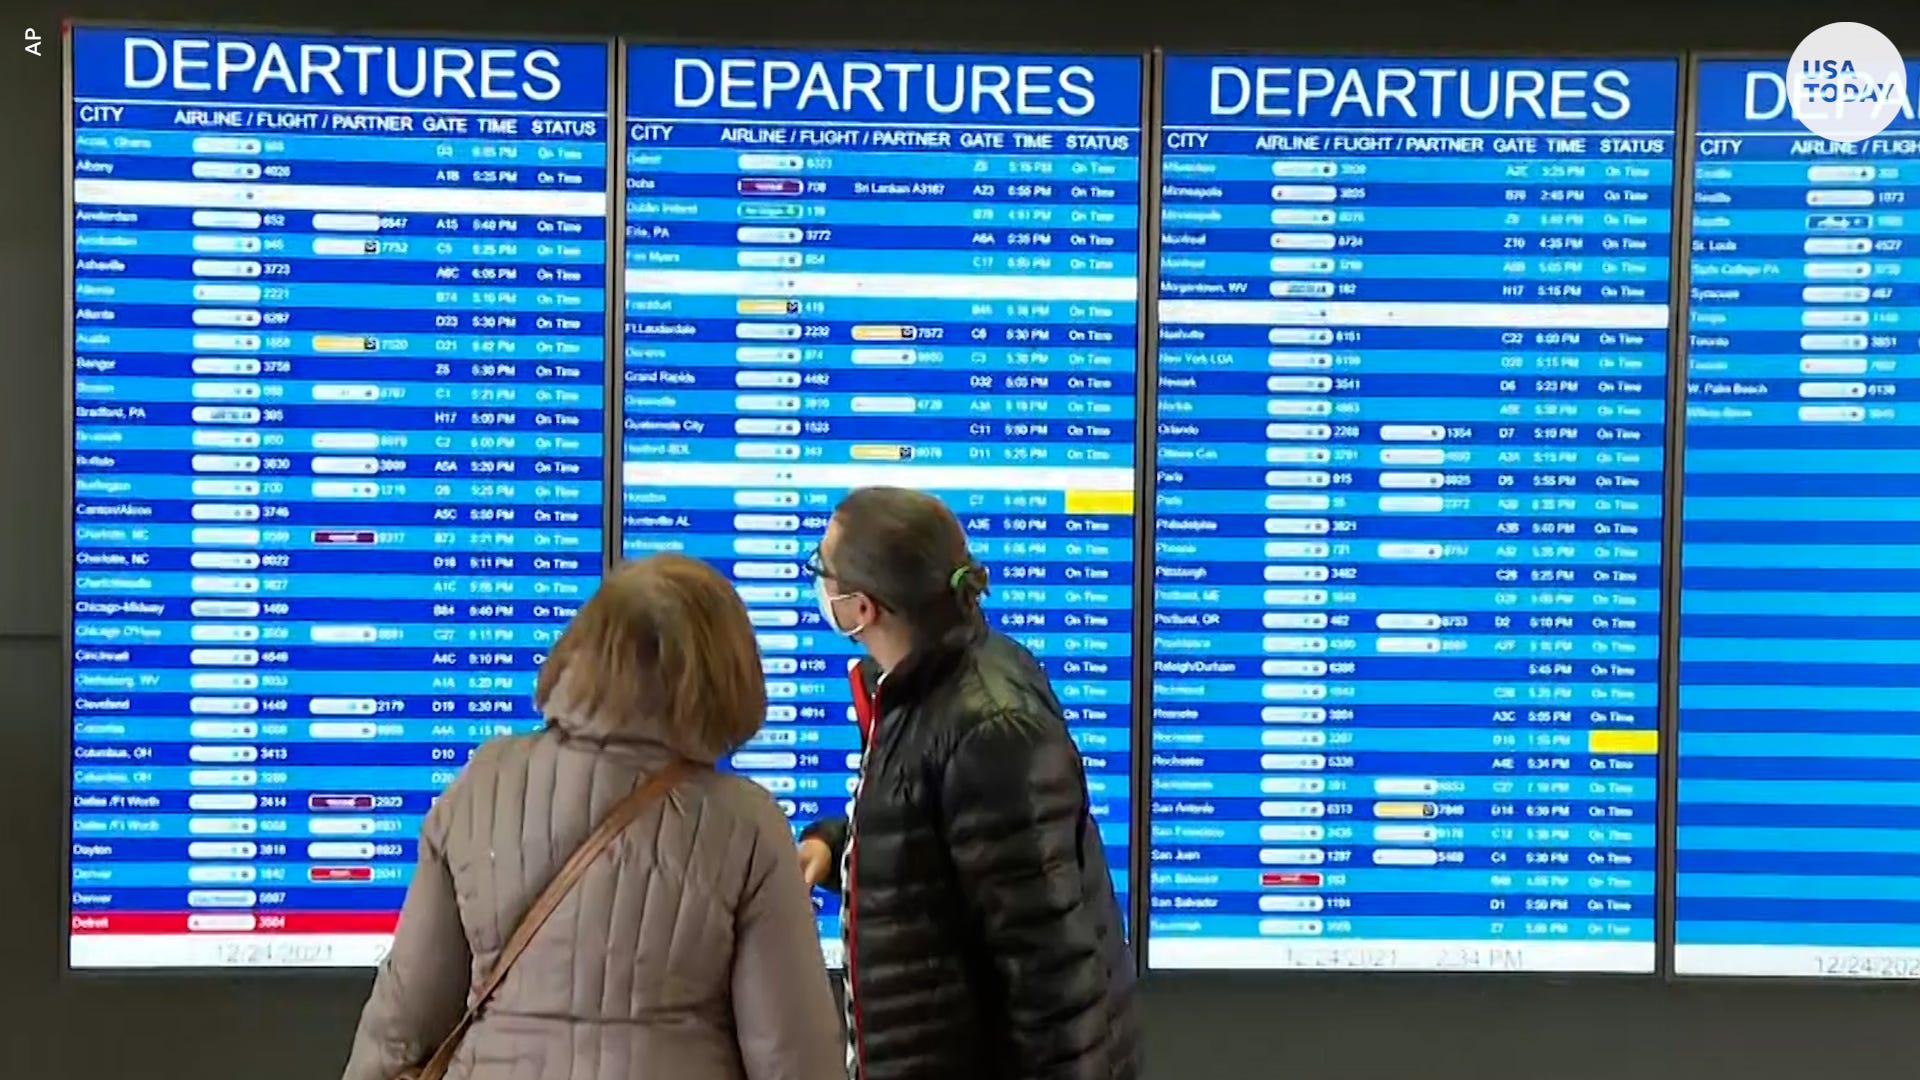 Holiday travel woes continue as thousands of US flights are canceled or delayed Monday thumbnail